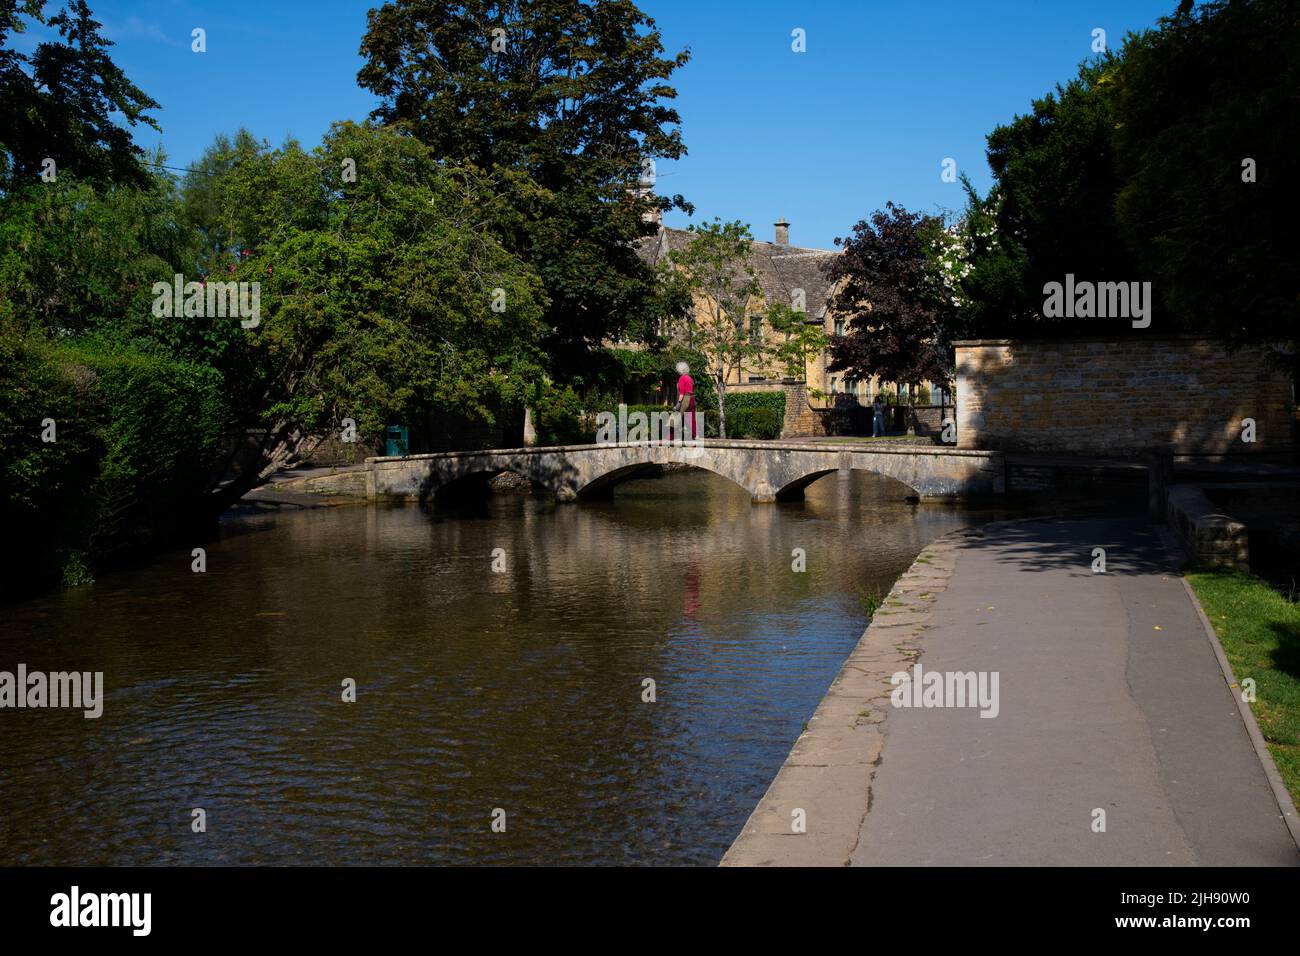 Bourton-on-the-Water, Gloucestershire, with gently flowing River Windrush crossed by attractive little bridges Stock Photo